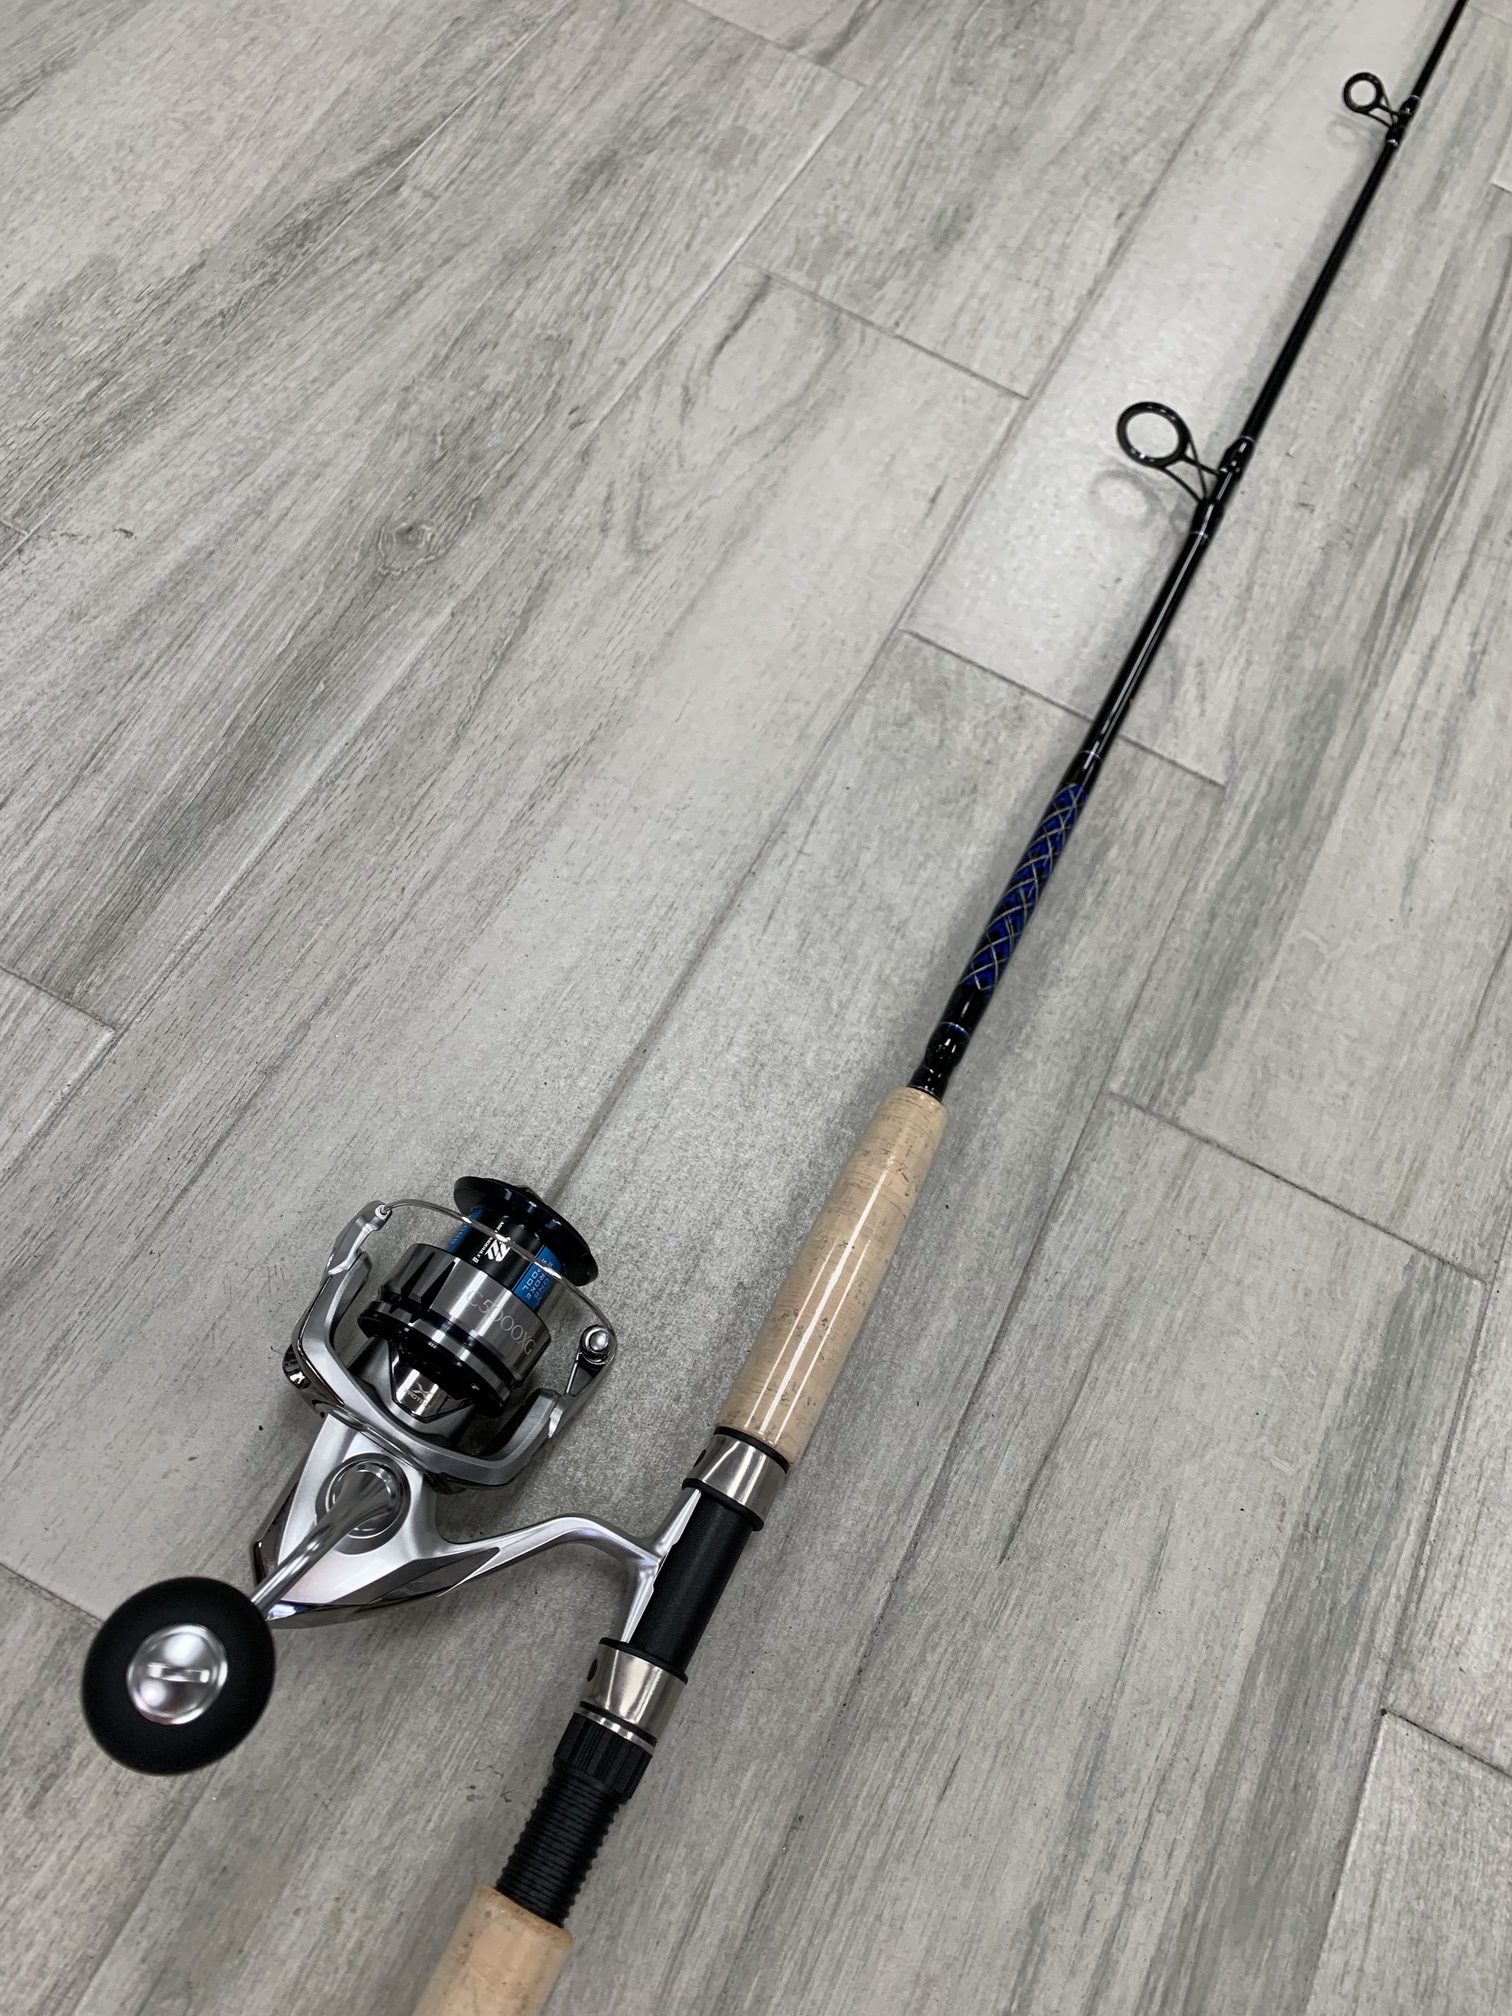 What rod to pair with Shimano Sedona c5000xg reel for inshore